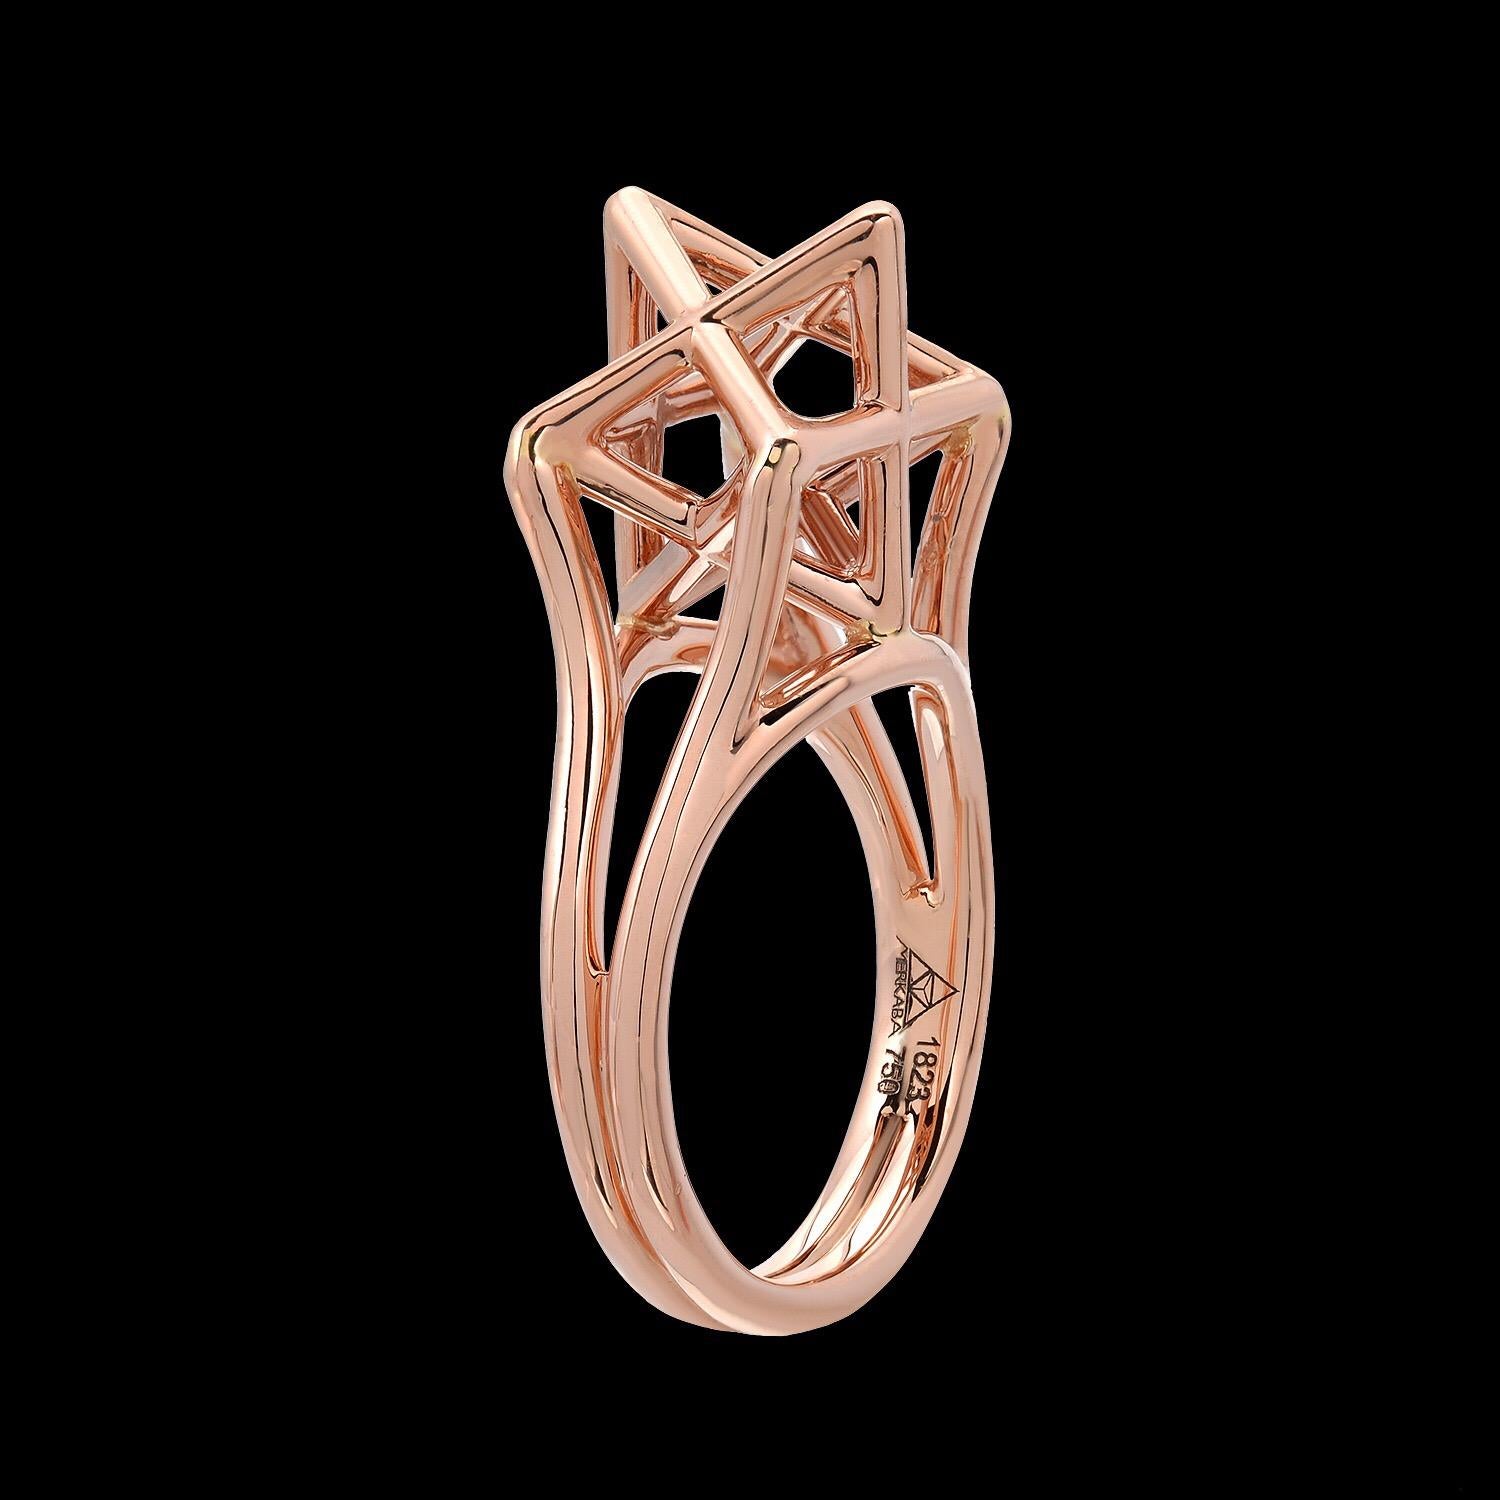 Rose Gold Ring - Merkaba three dimensional star tetrahedron, 18K rose gold ring, featuring a dramatic, sculptural design, extending upward from the hand 0.43”, a stunning three-dimensional symbol of universal light. 
Size 6. Resizing is